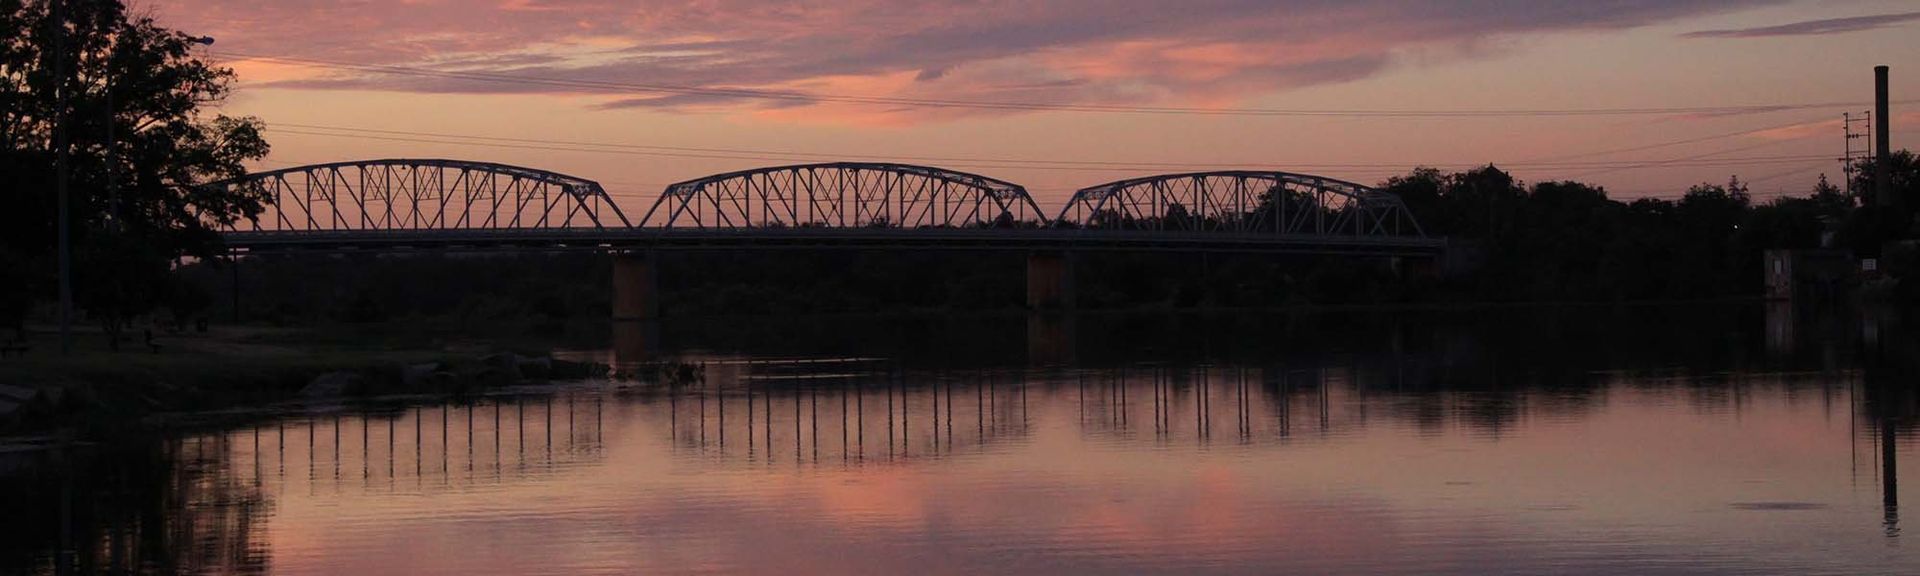 A bridge over a body of water at sunset